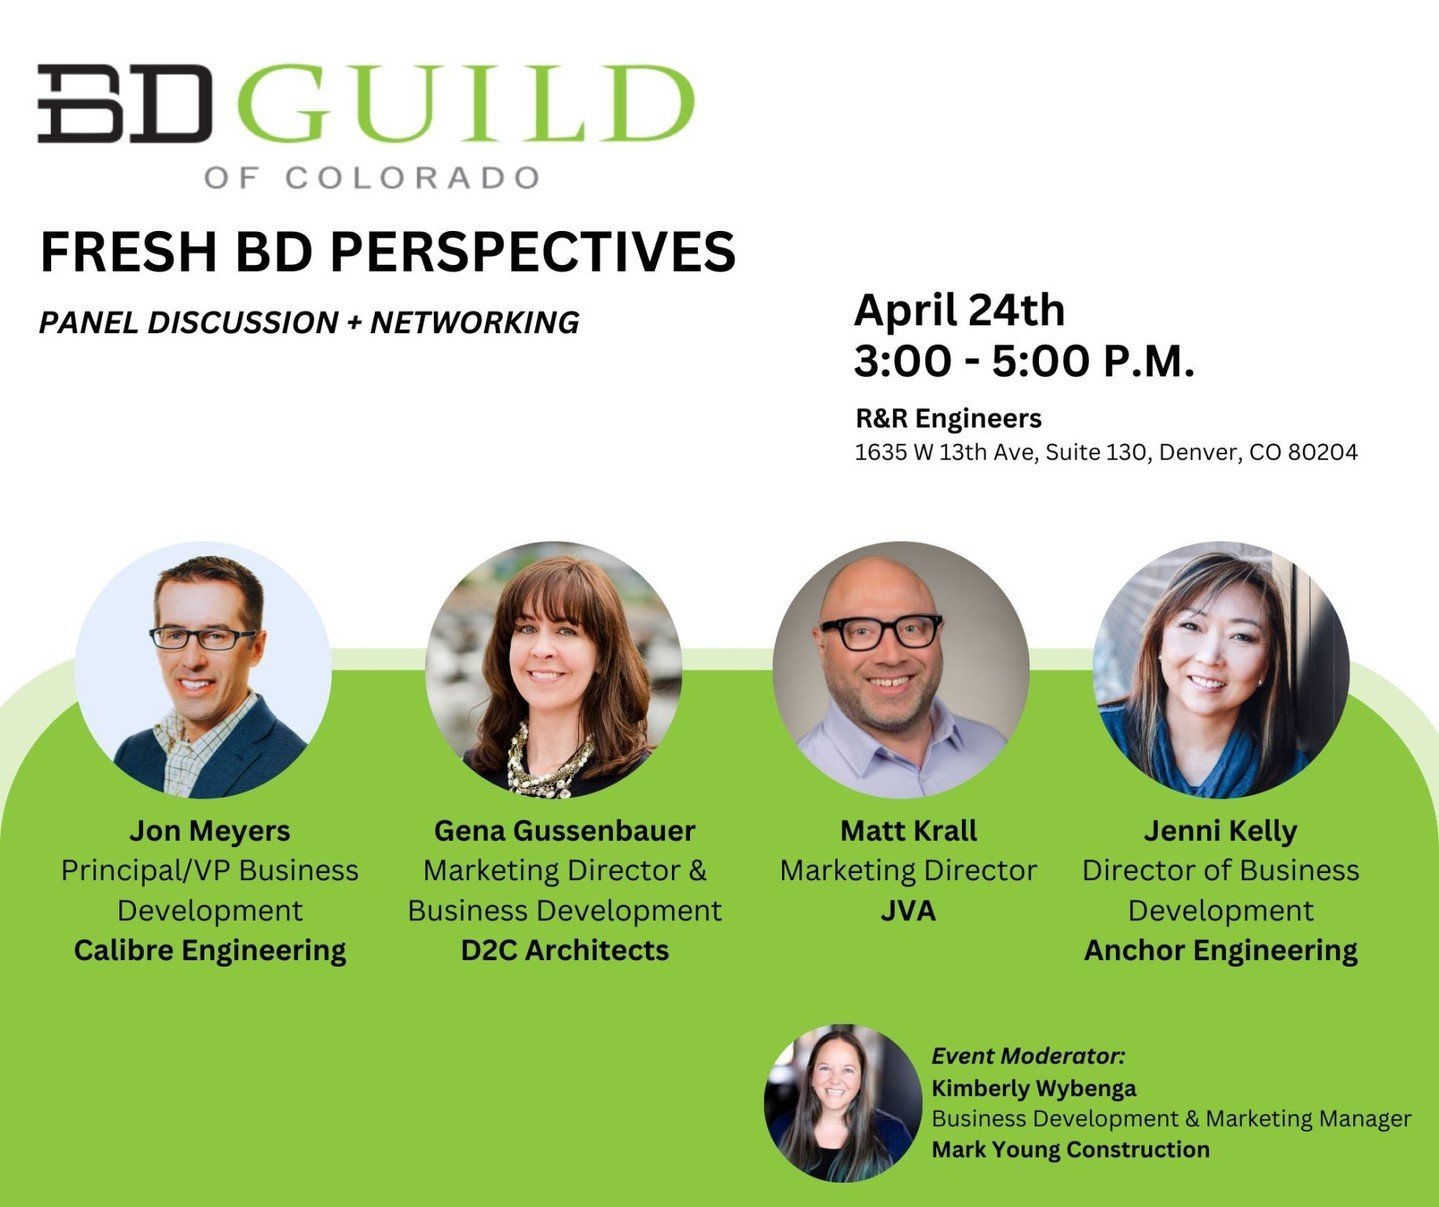 R&amp;R is thrilled to host the next BD Guild of Colorado event on Thursday April 24th, complete with a panel of industry experts, friends and colleagues, ready to share their insights on Fresh #businessdevelopment Perspectives. 

Have your registere